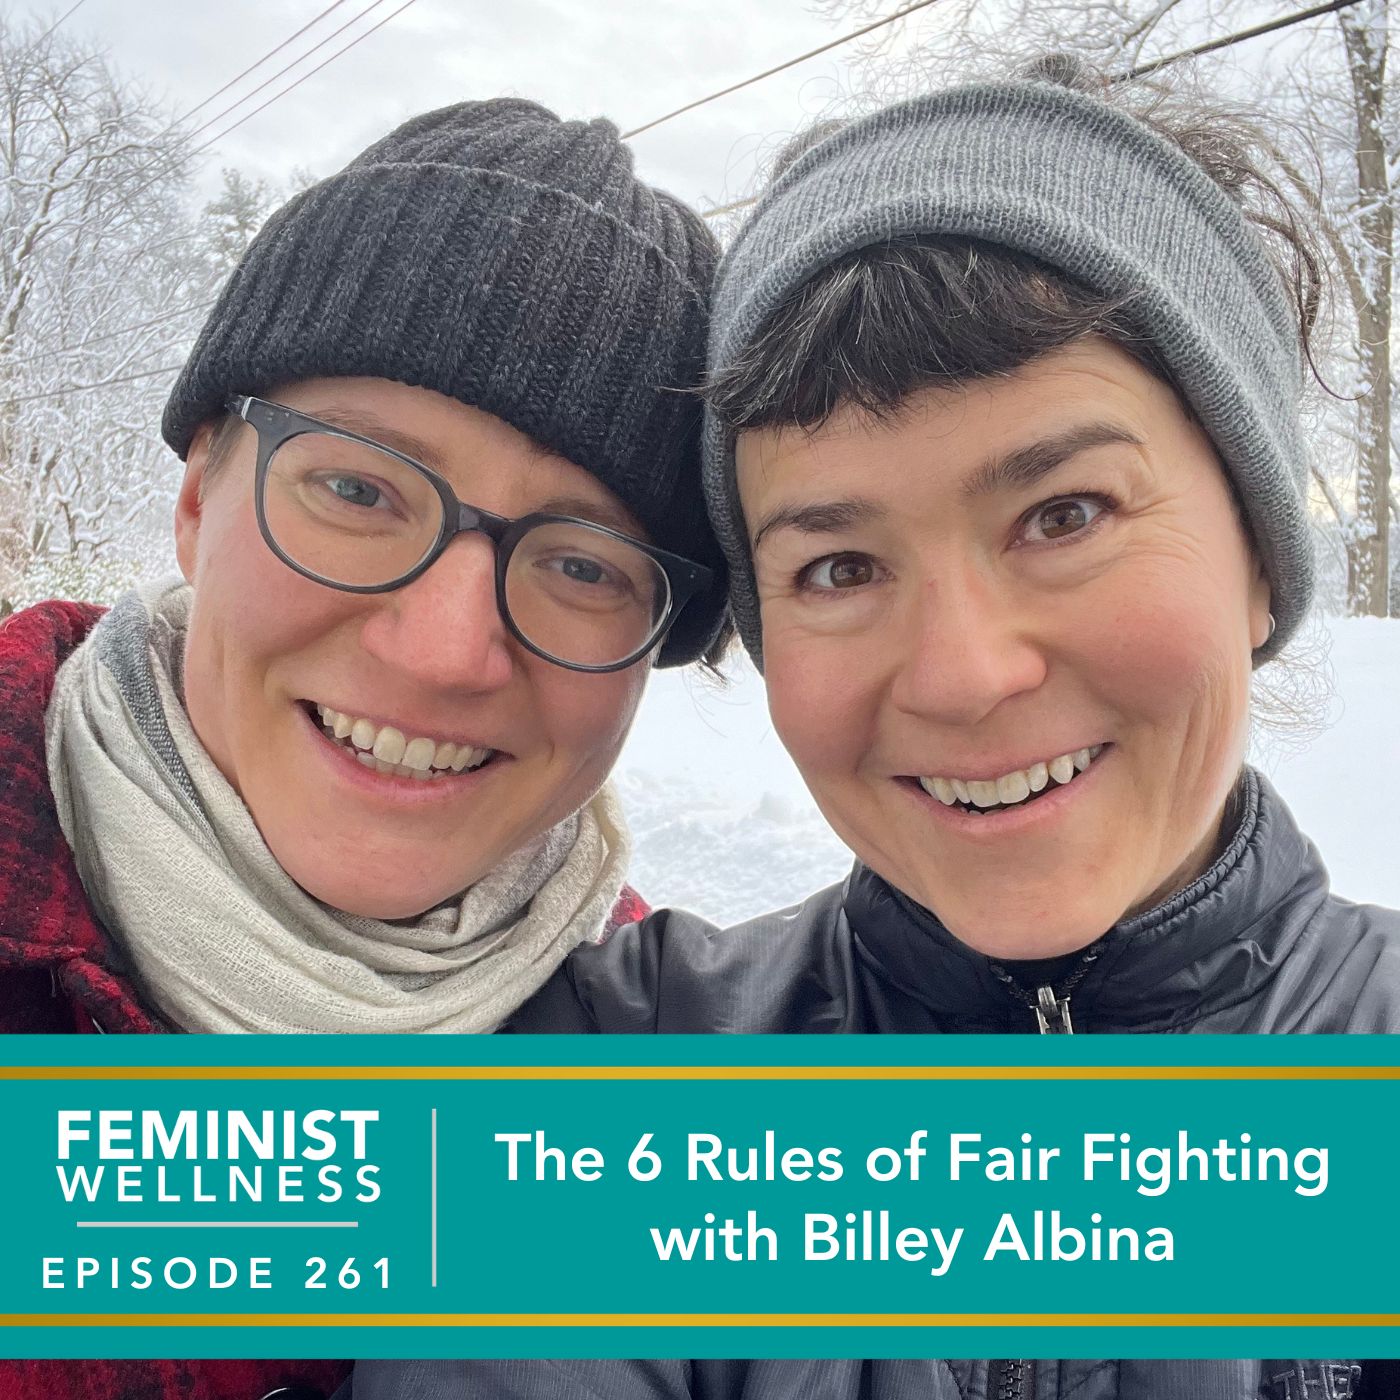 Feminist Wellness with Victoria Albina | The 6 Rules of Fair Fighting with Billey Albina